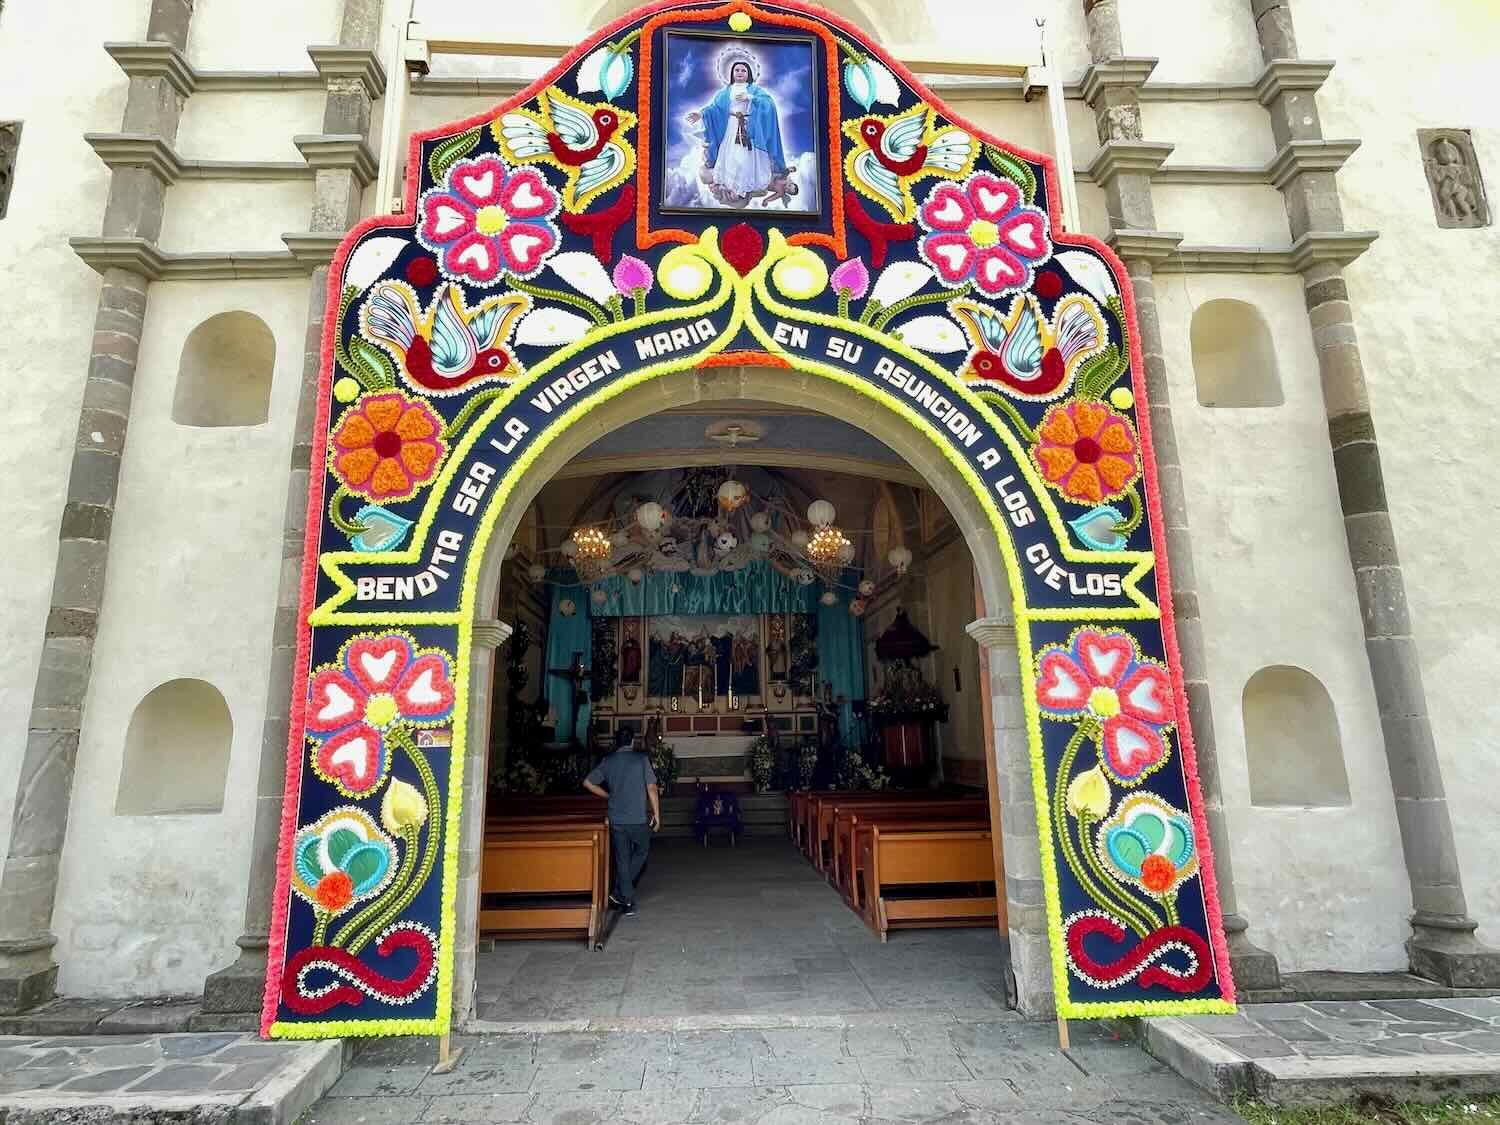 Floral arches date back to pre-Columbian times. Often placed at entrances to churches or towns, they signify a celebration of gratitude and devotion.